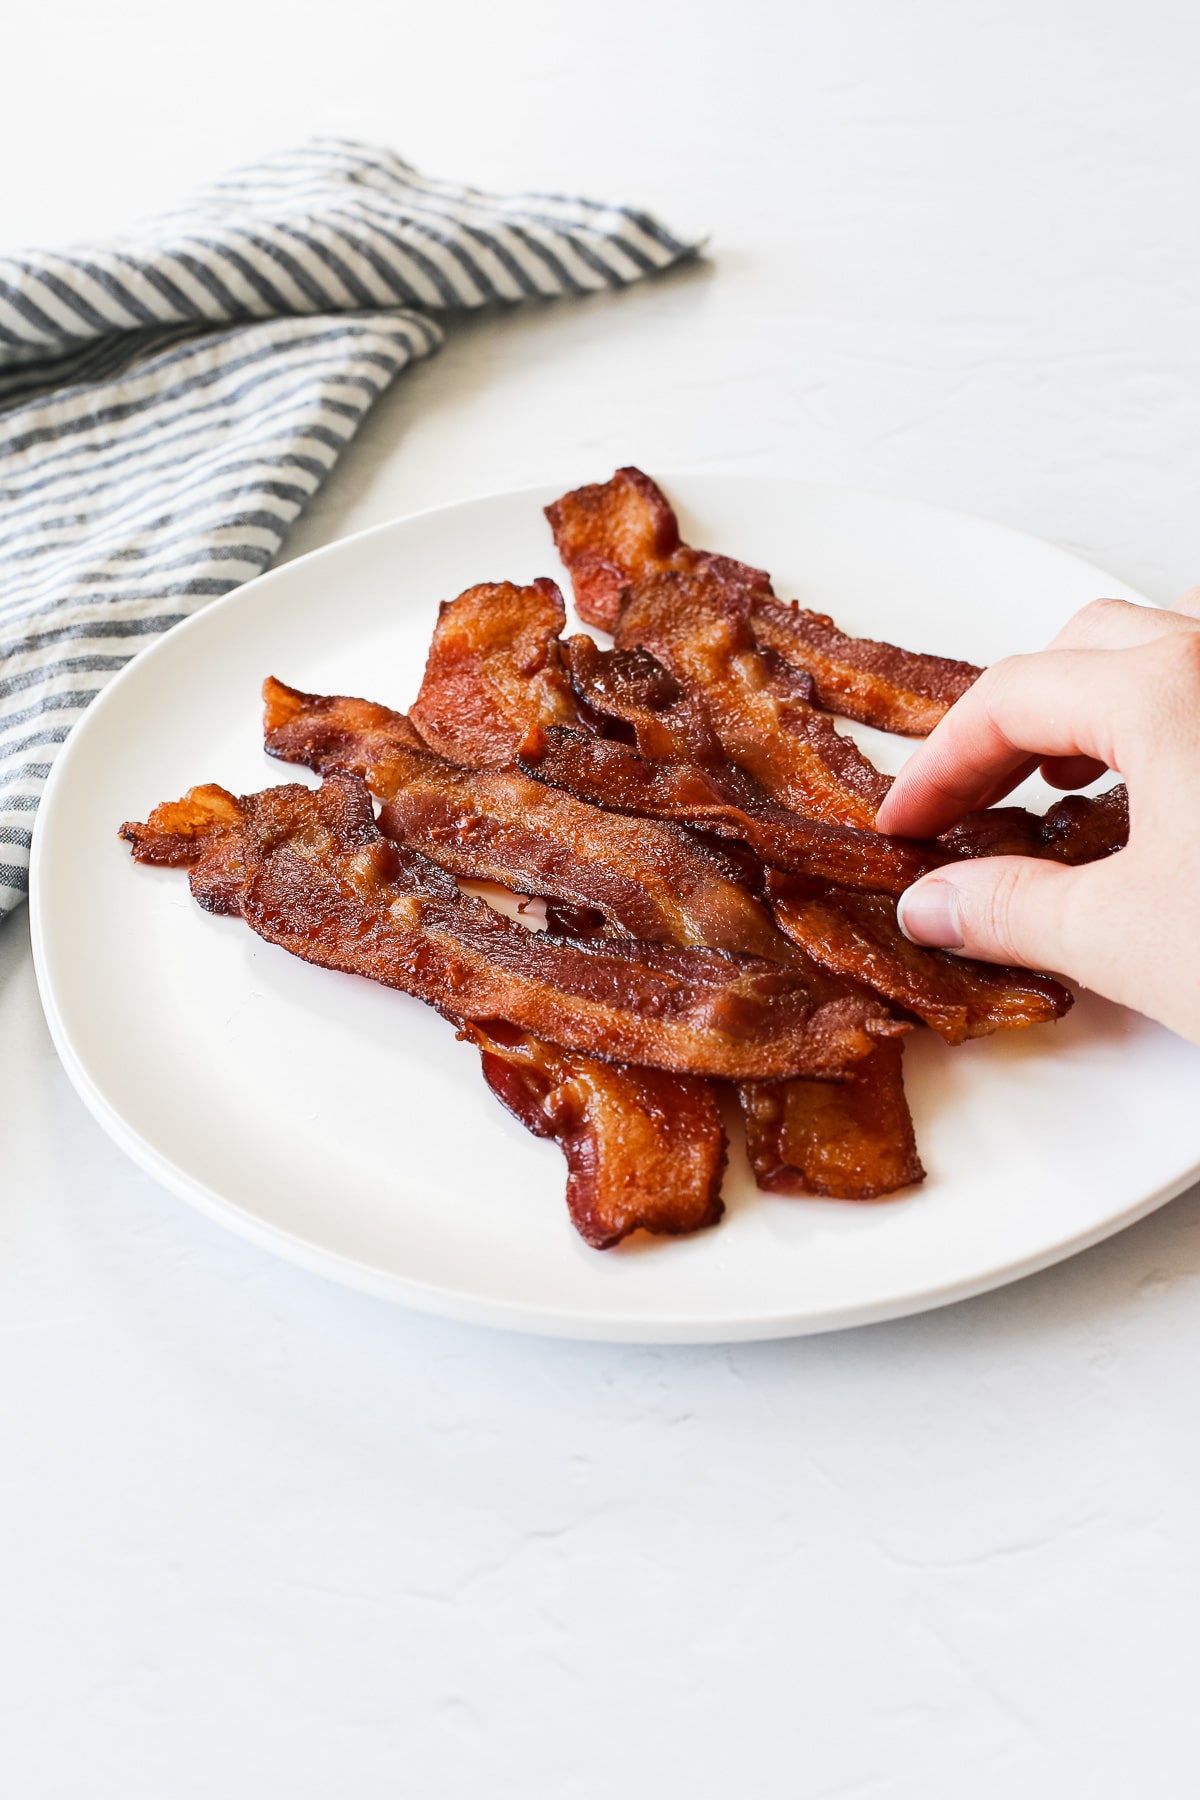 Grabbing cooked warm bacon off a plate that just came out of the oven.